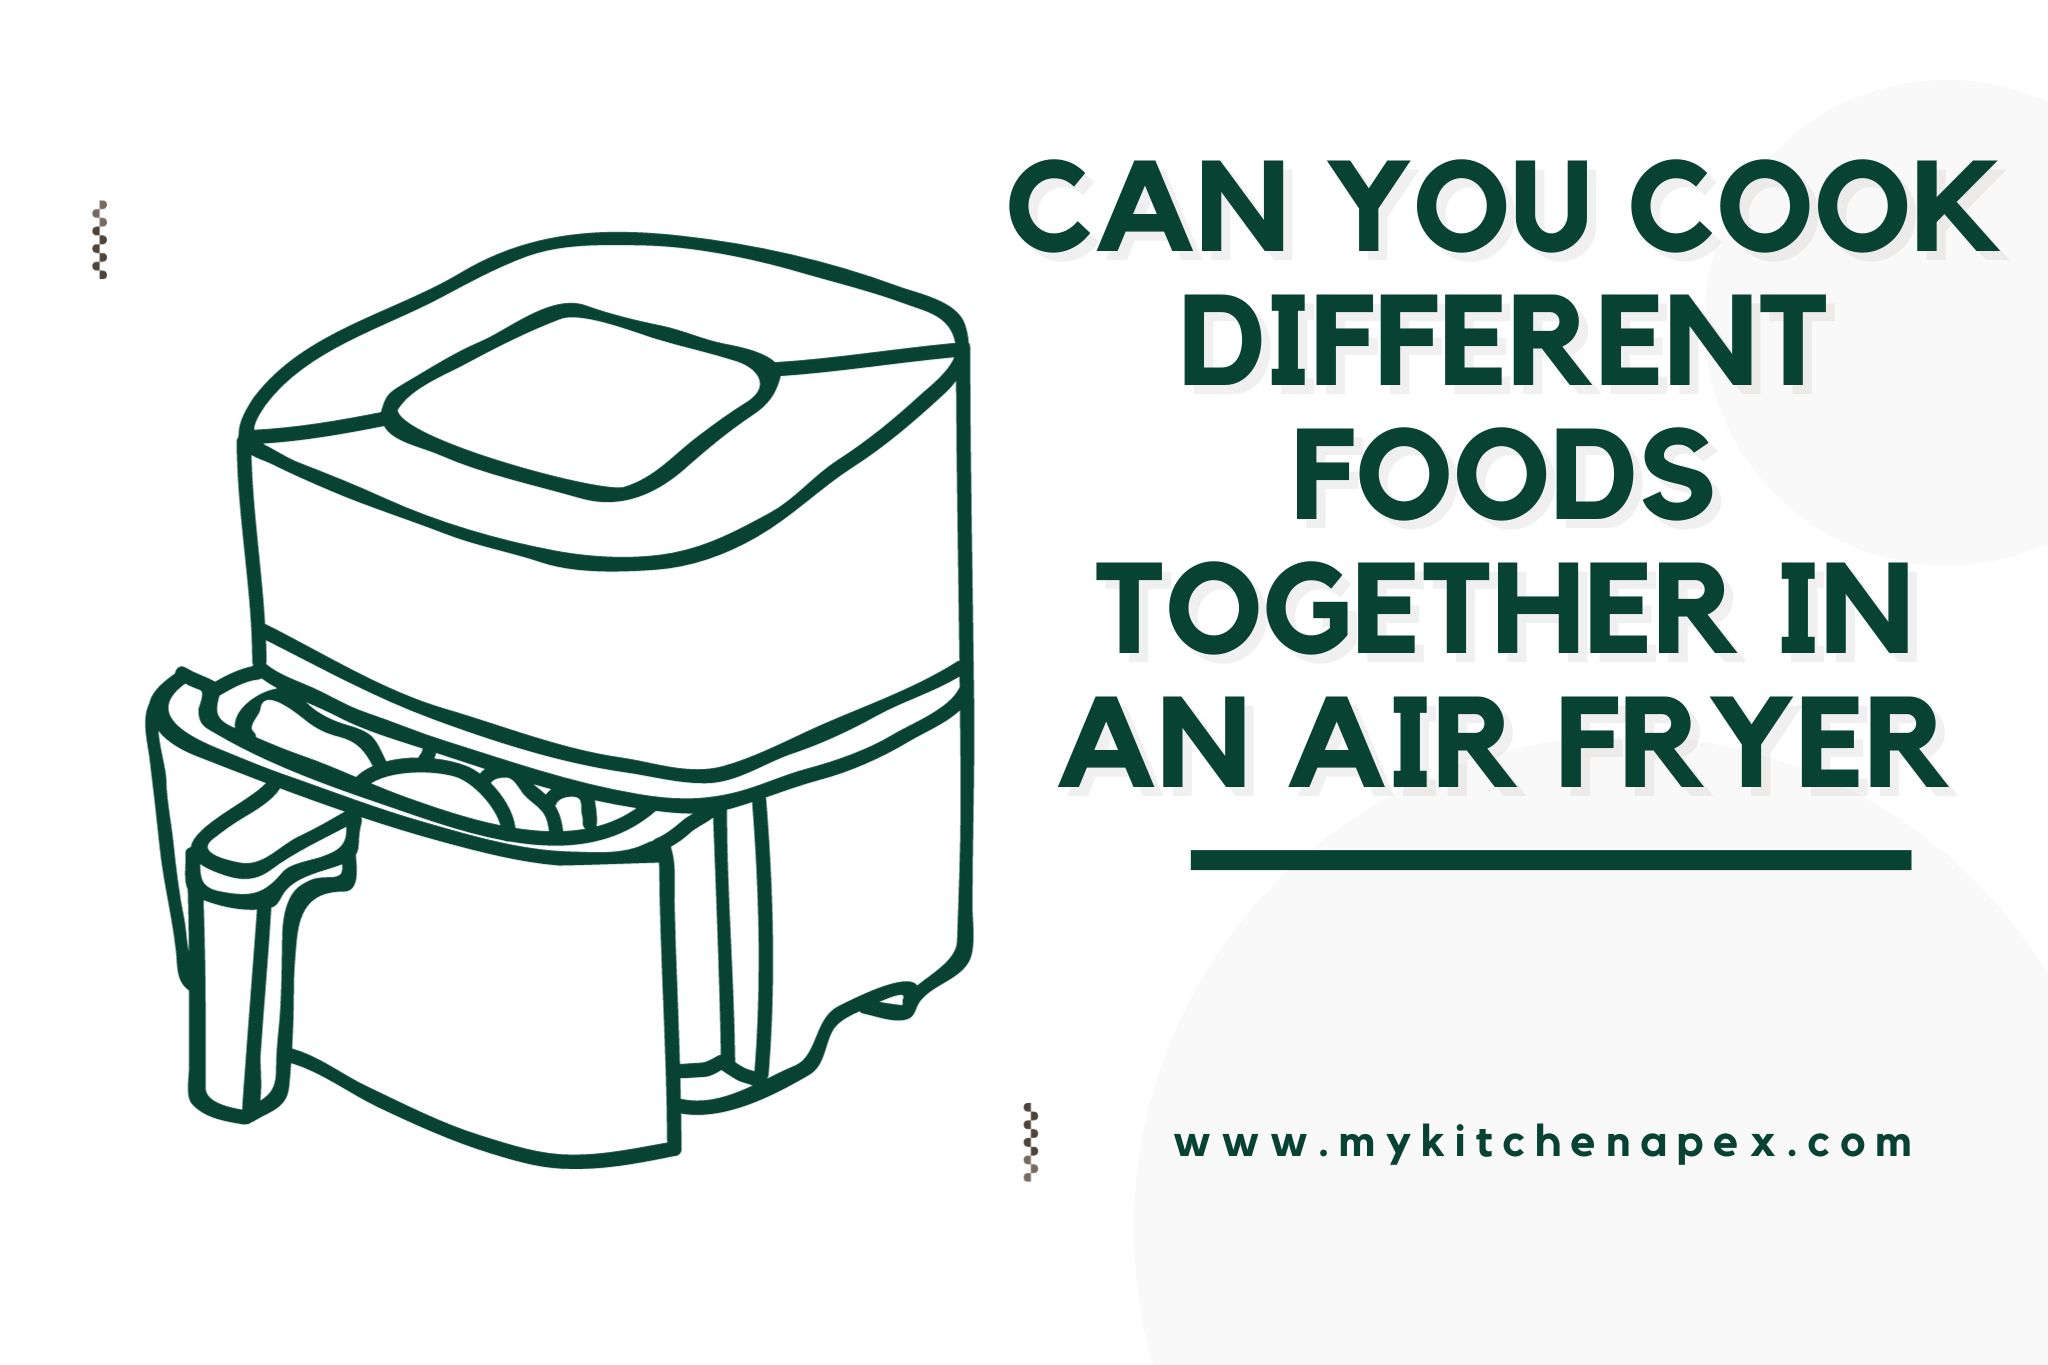 can you cook different foods together in an air fryer